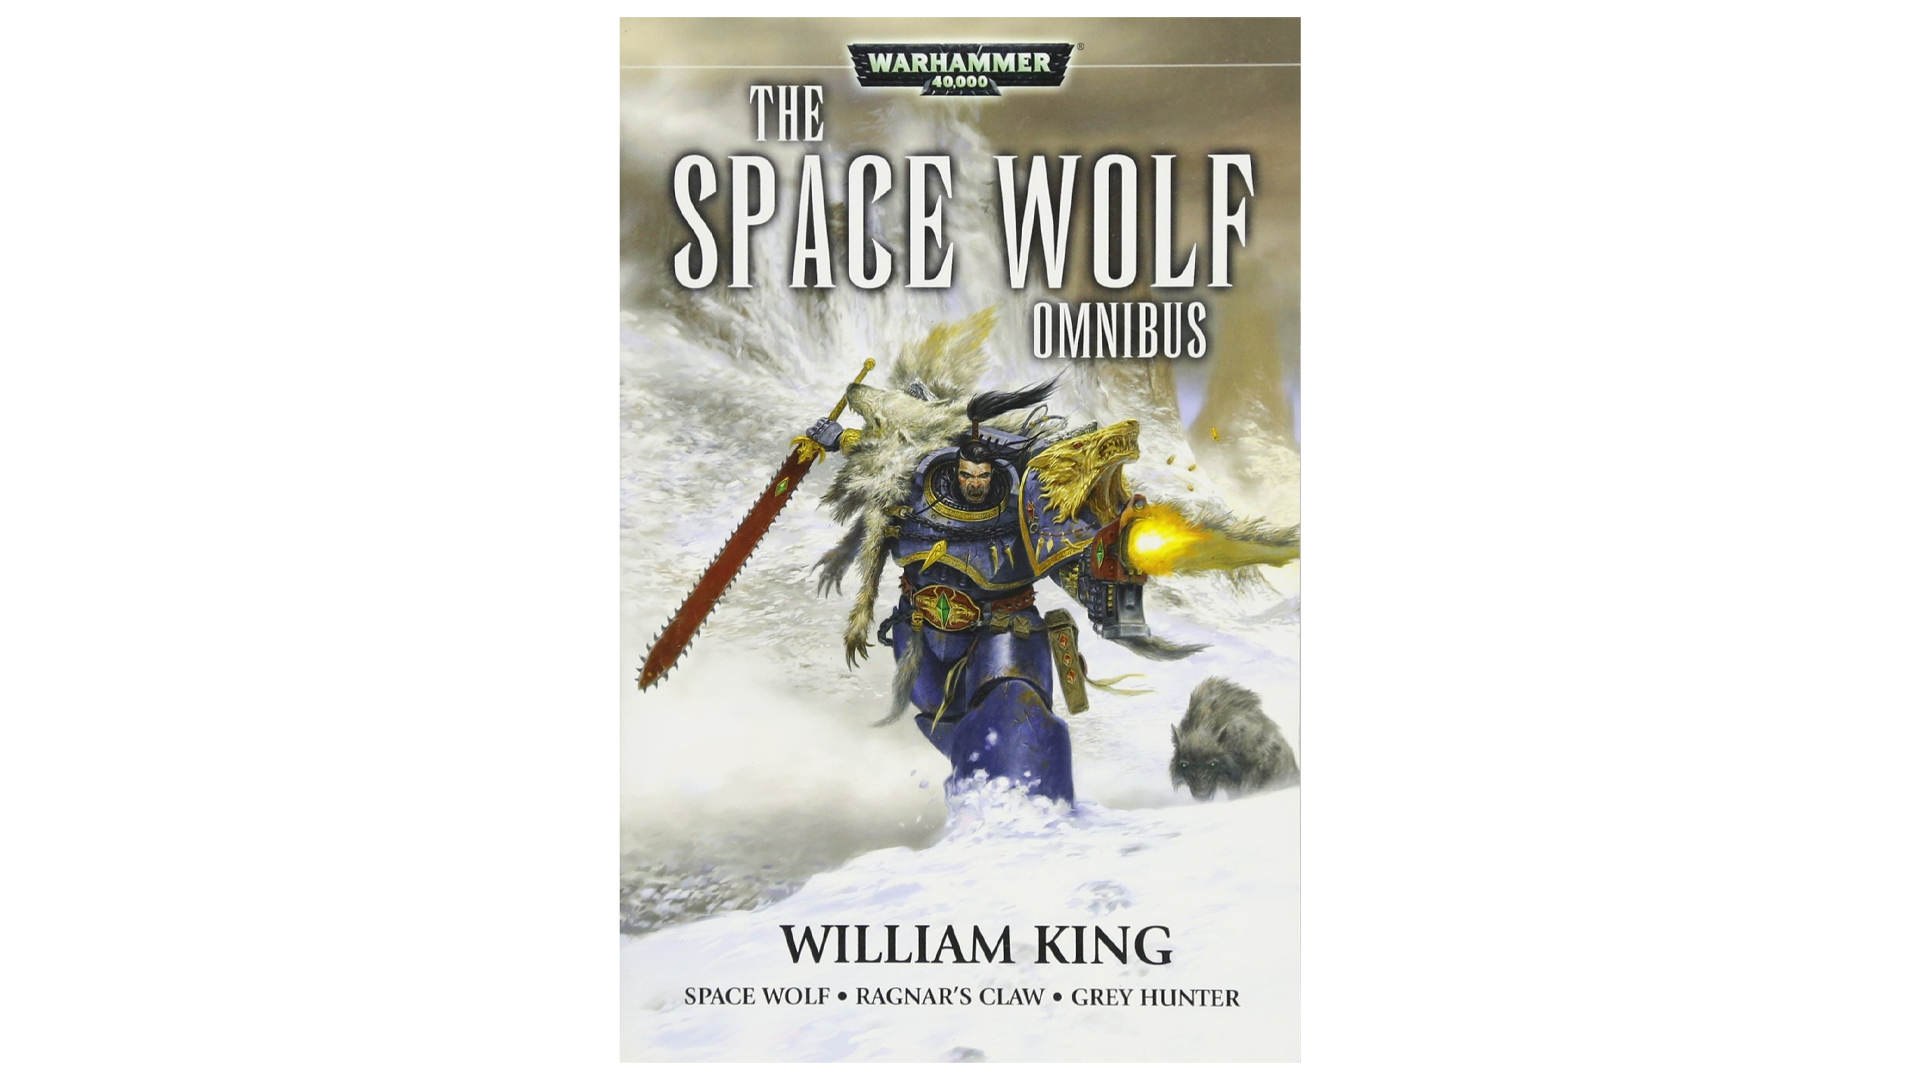 warhammer books about chaos